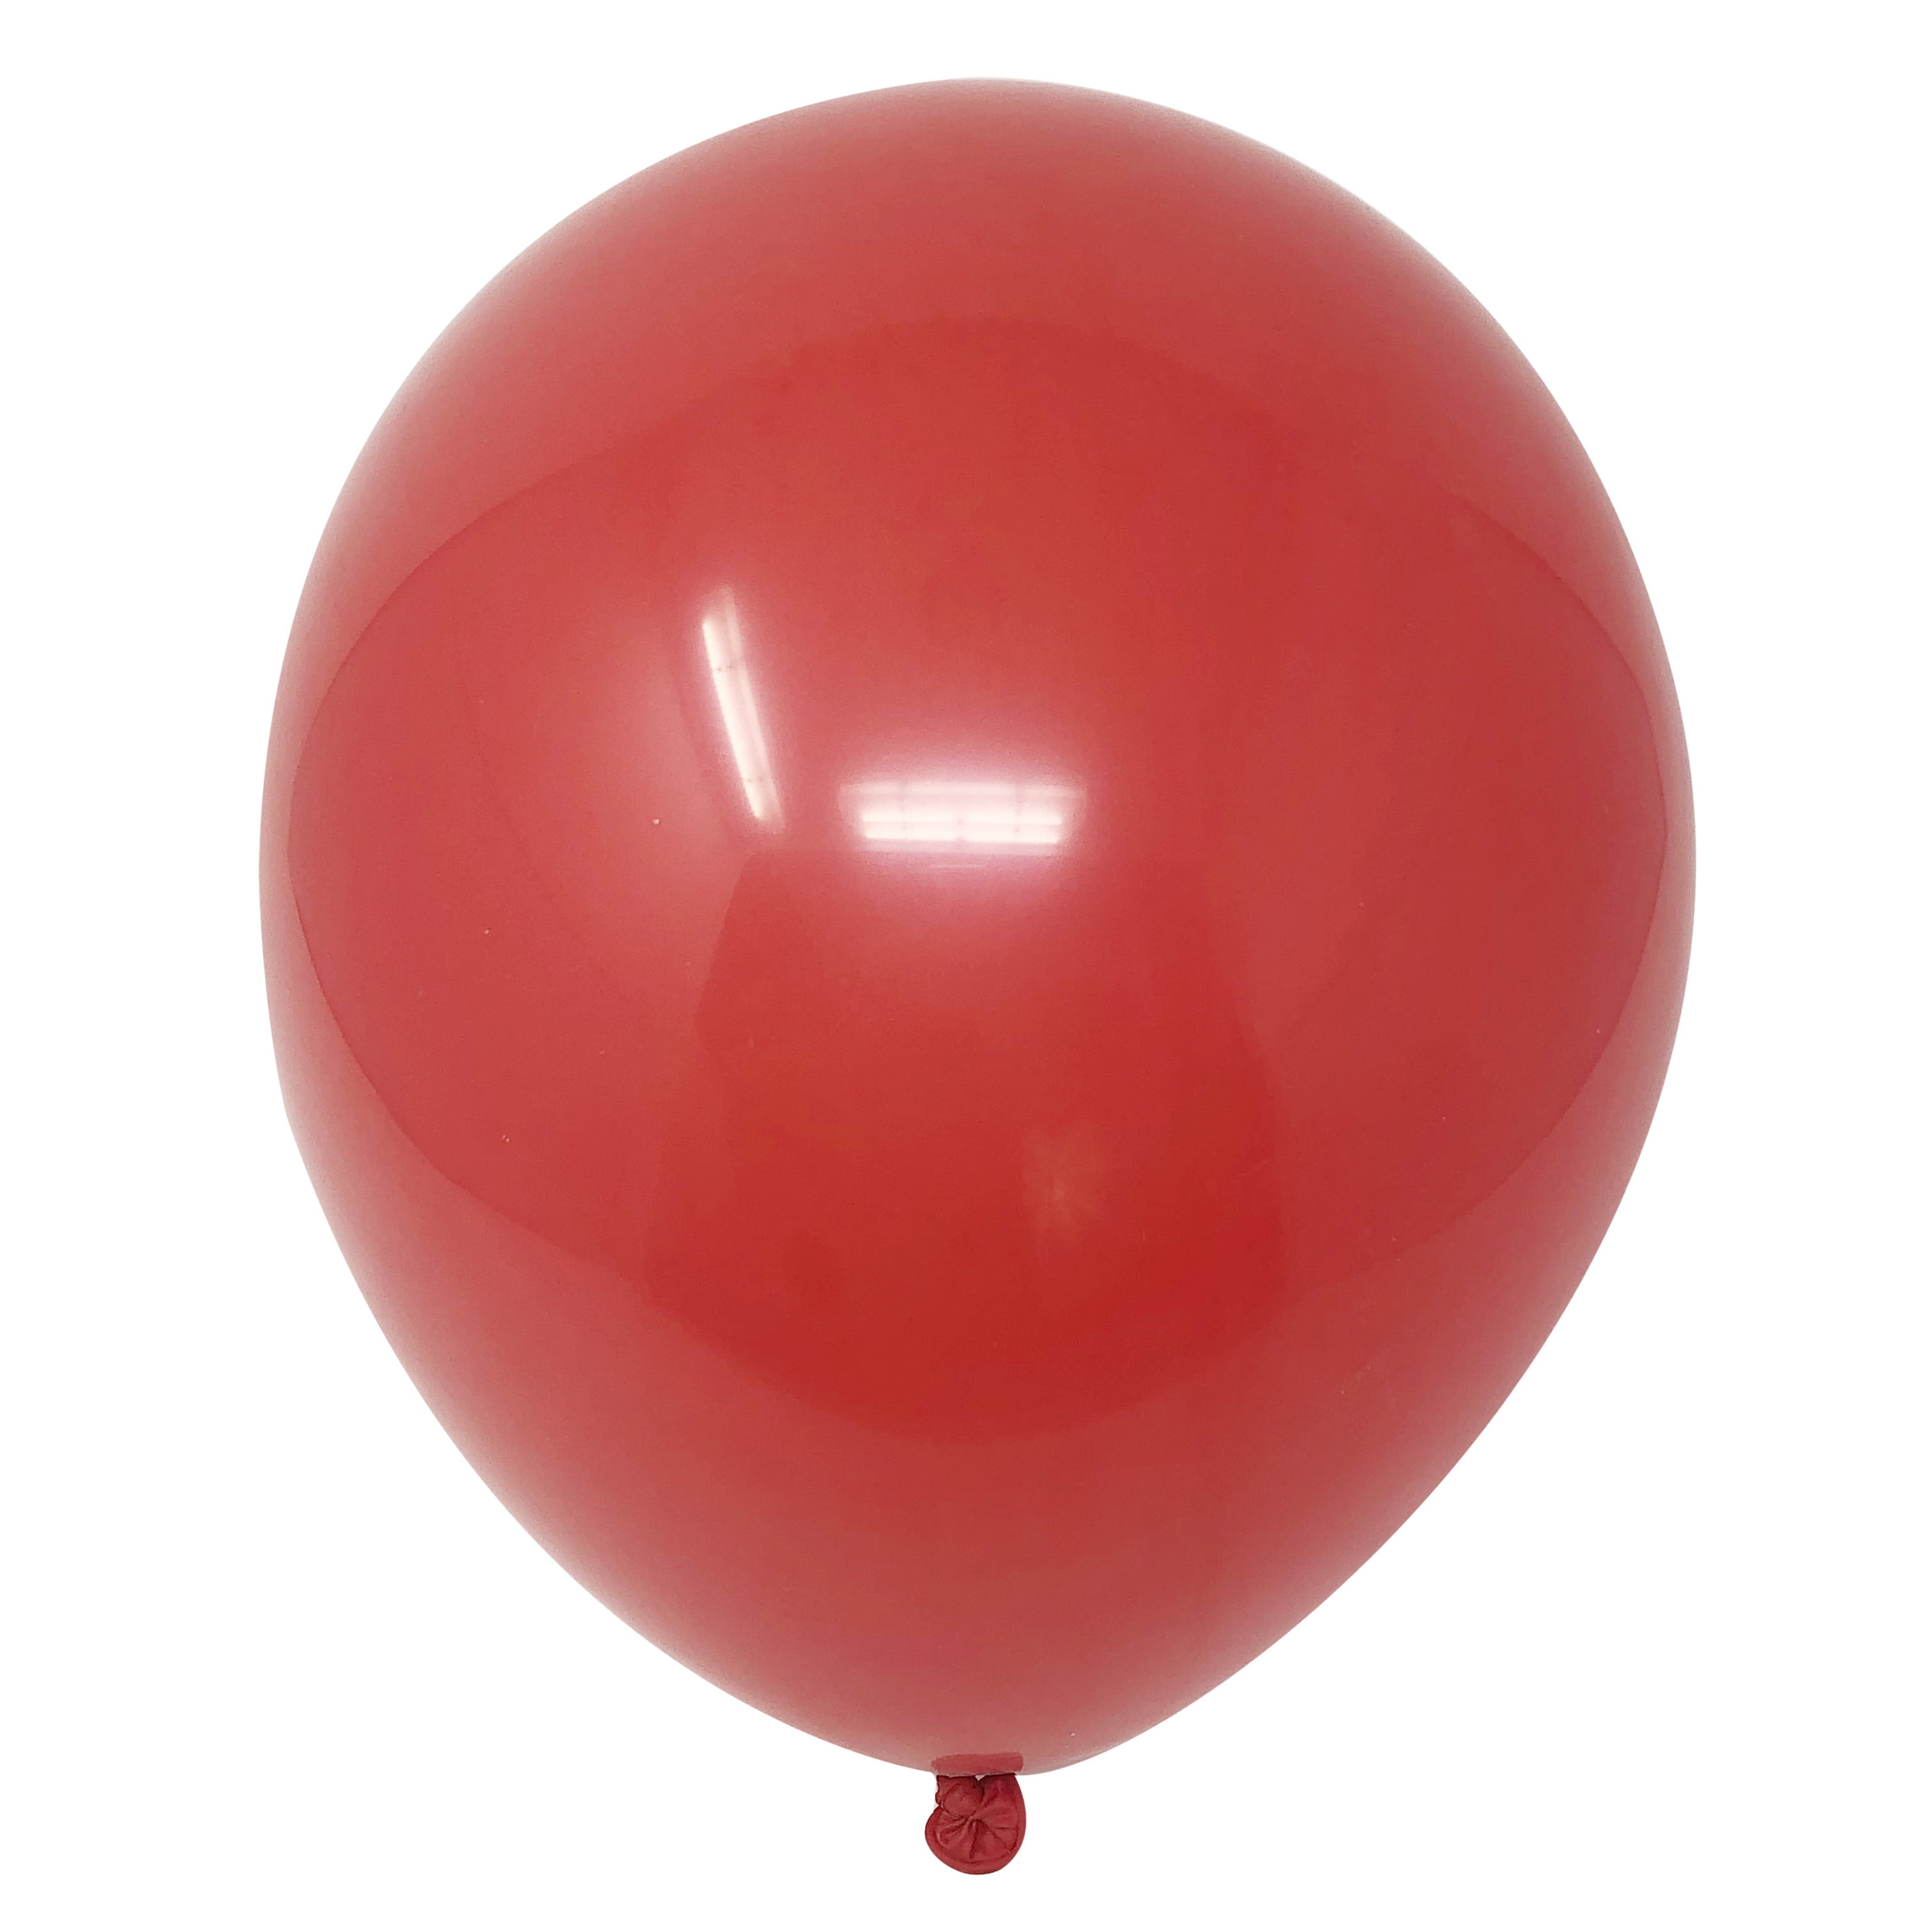 Pixelated Red TNT Balloon 12 Inch Latex Party Balloons 25 Count 